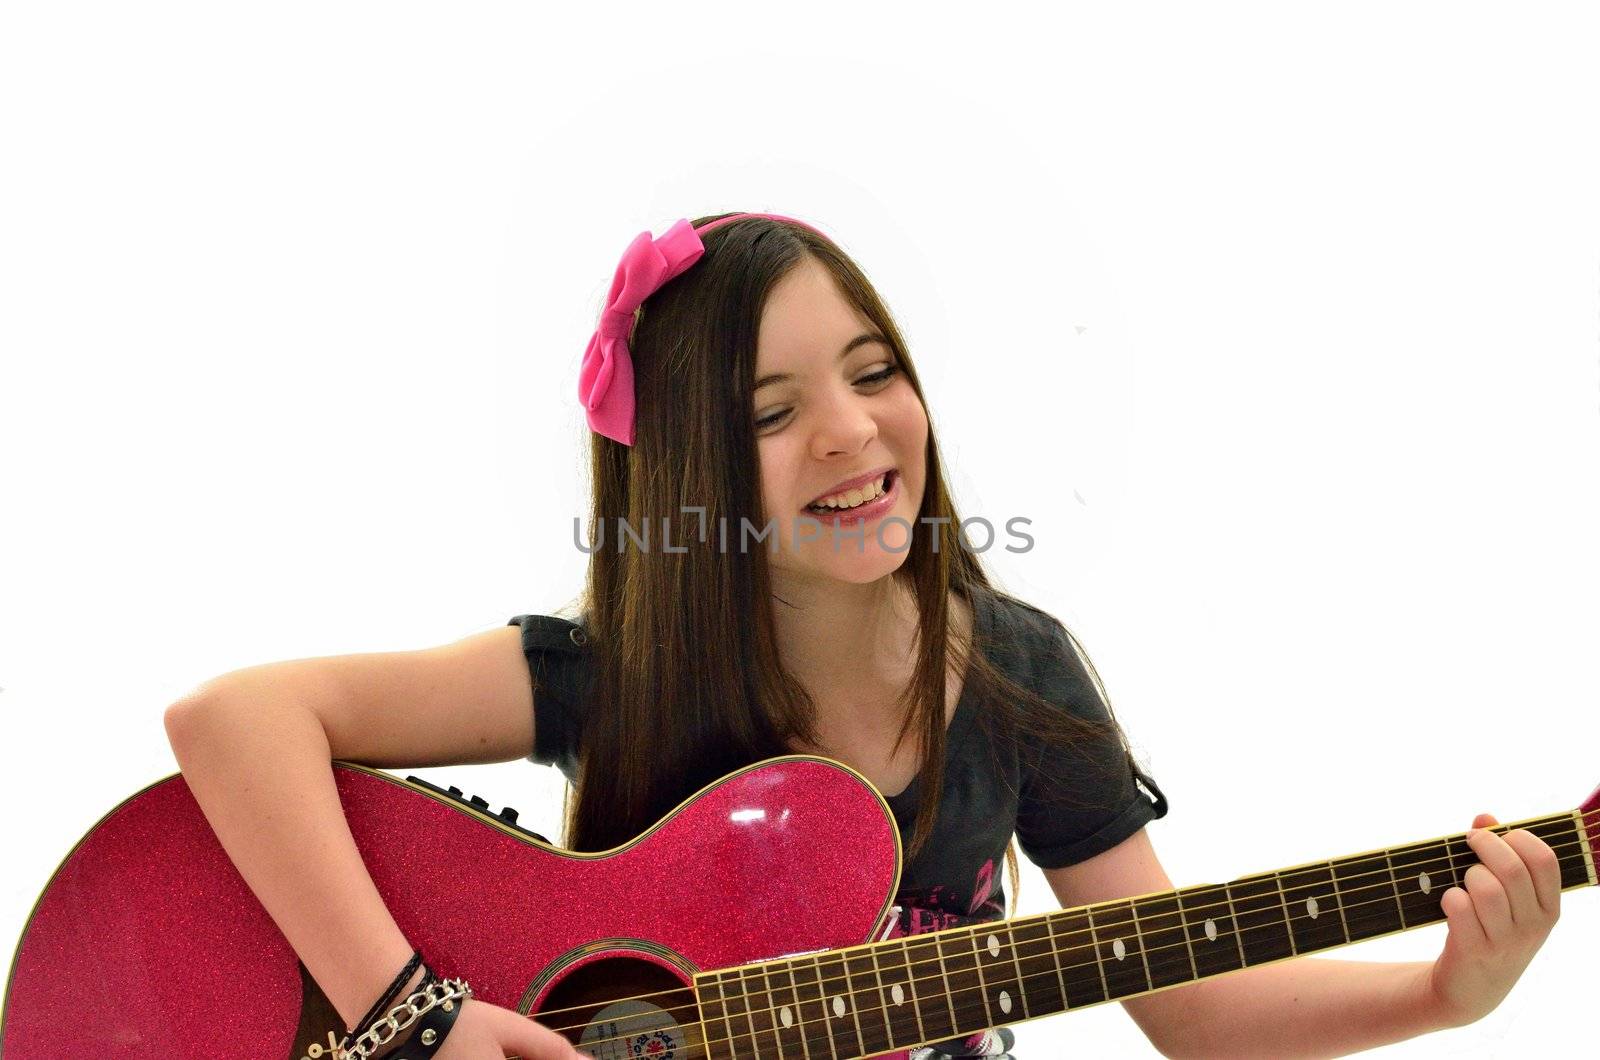 Live music from a young performer